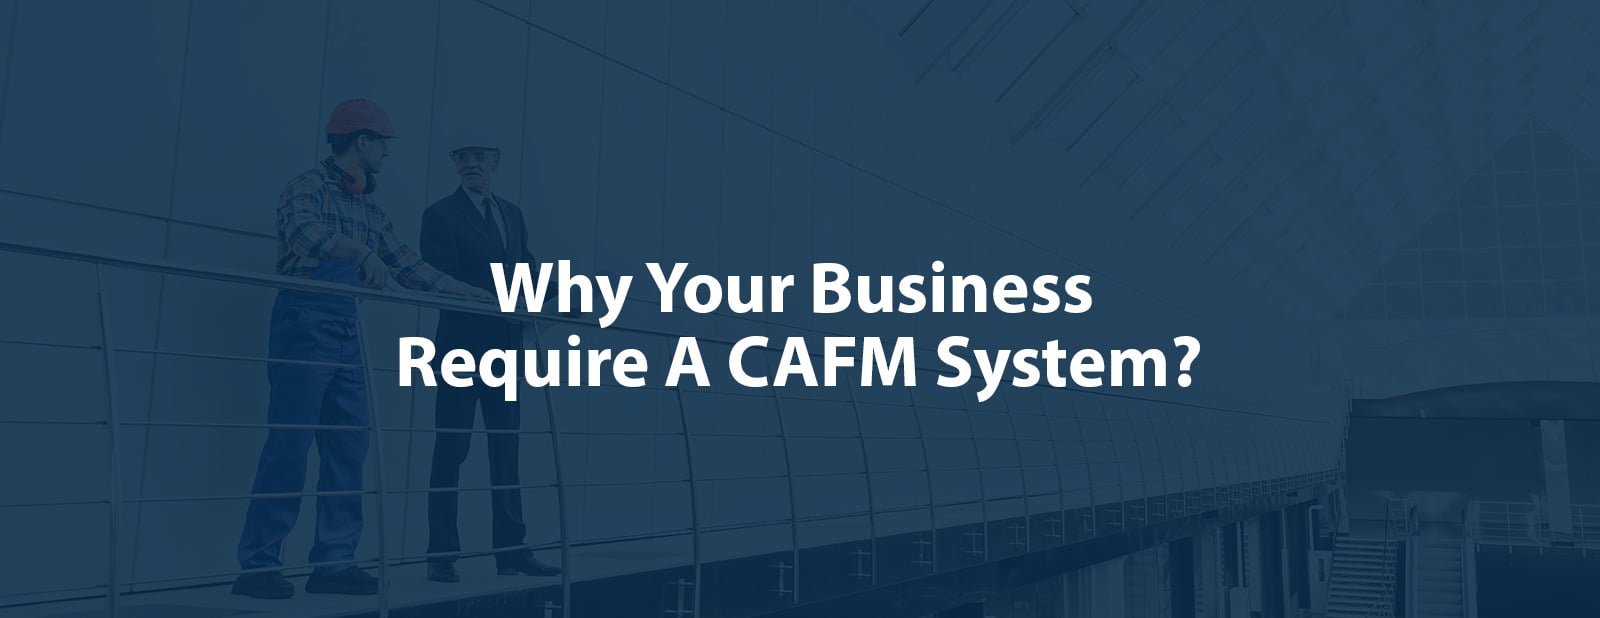 Why Your Business Require A CAFM System?